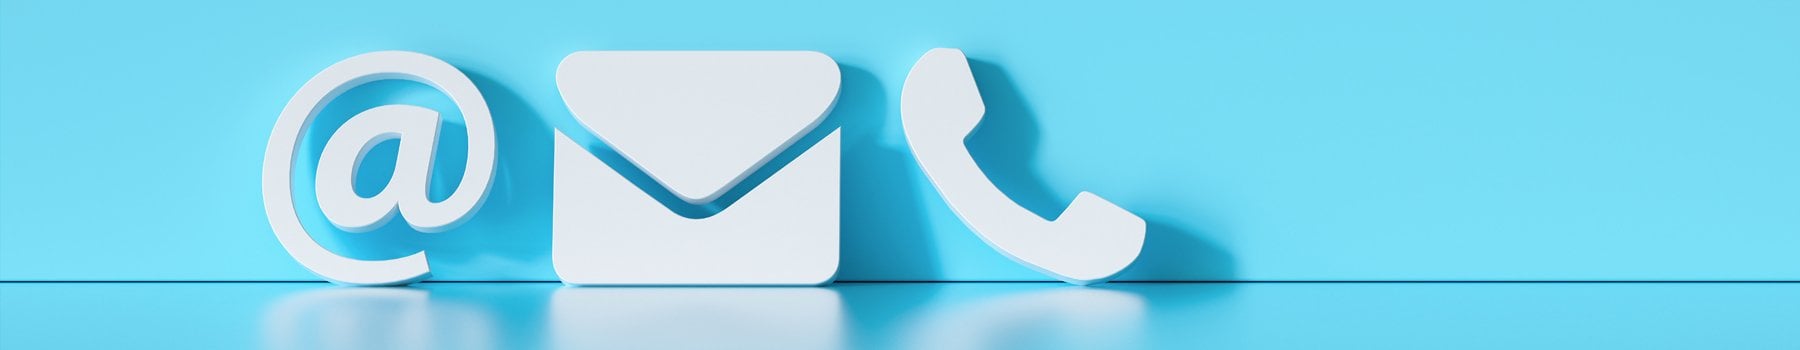 Email, post and telephone icons on a light blue background